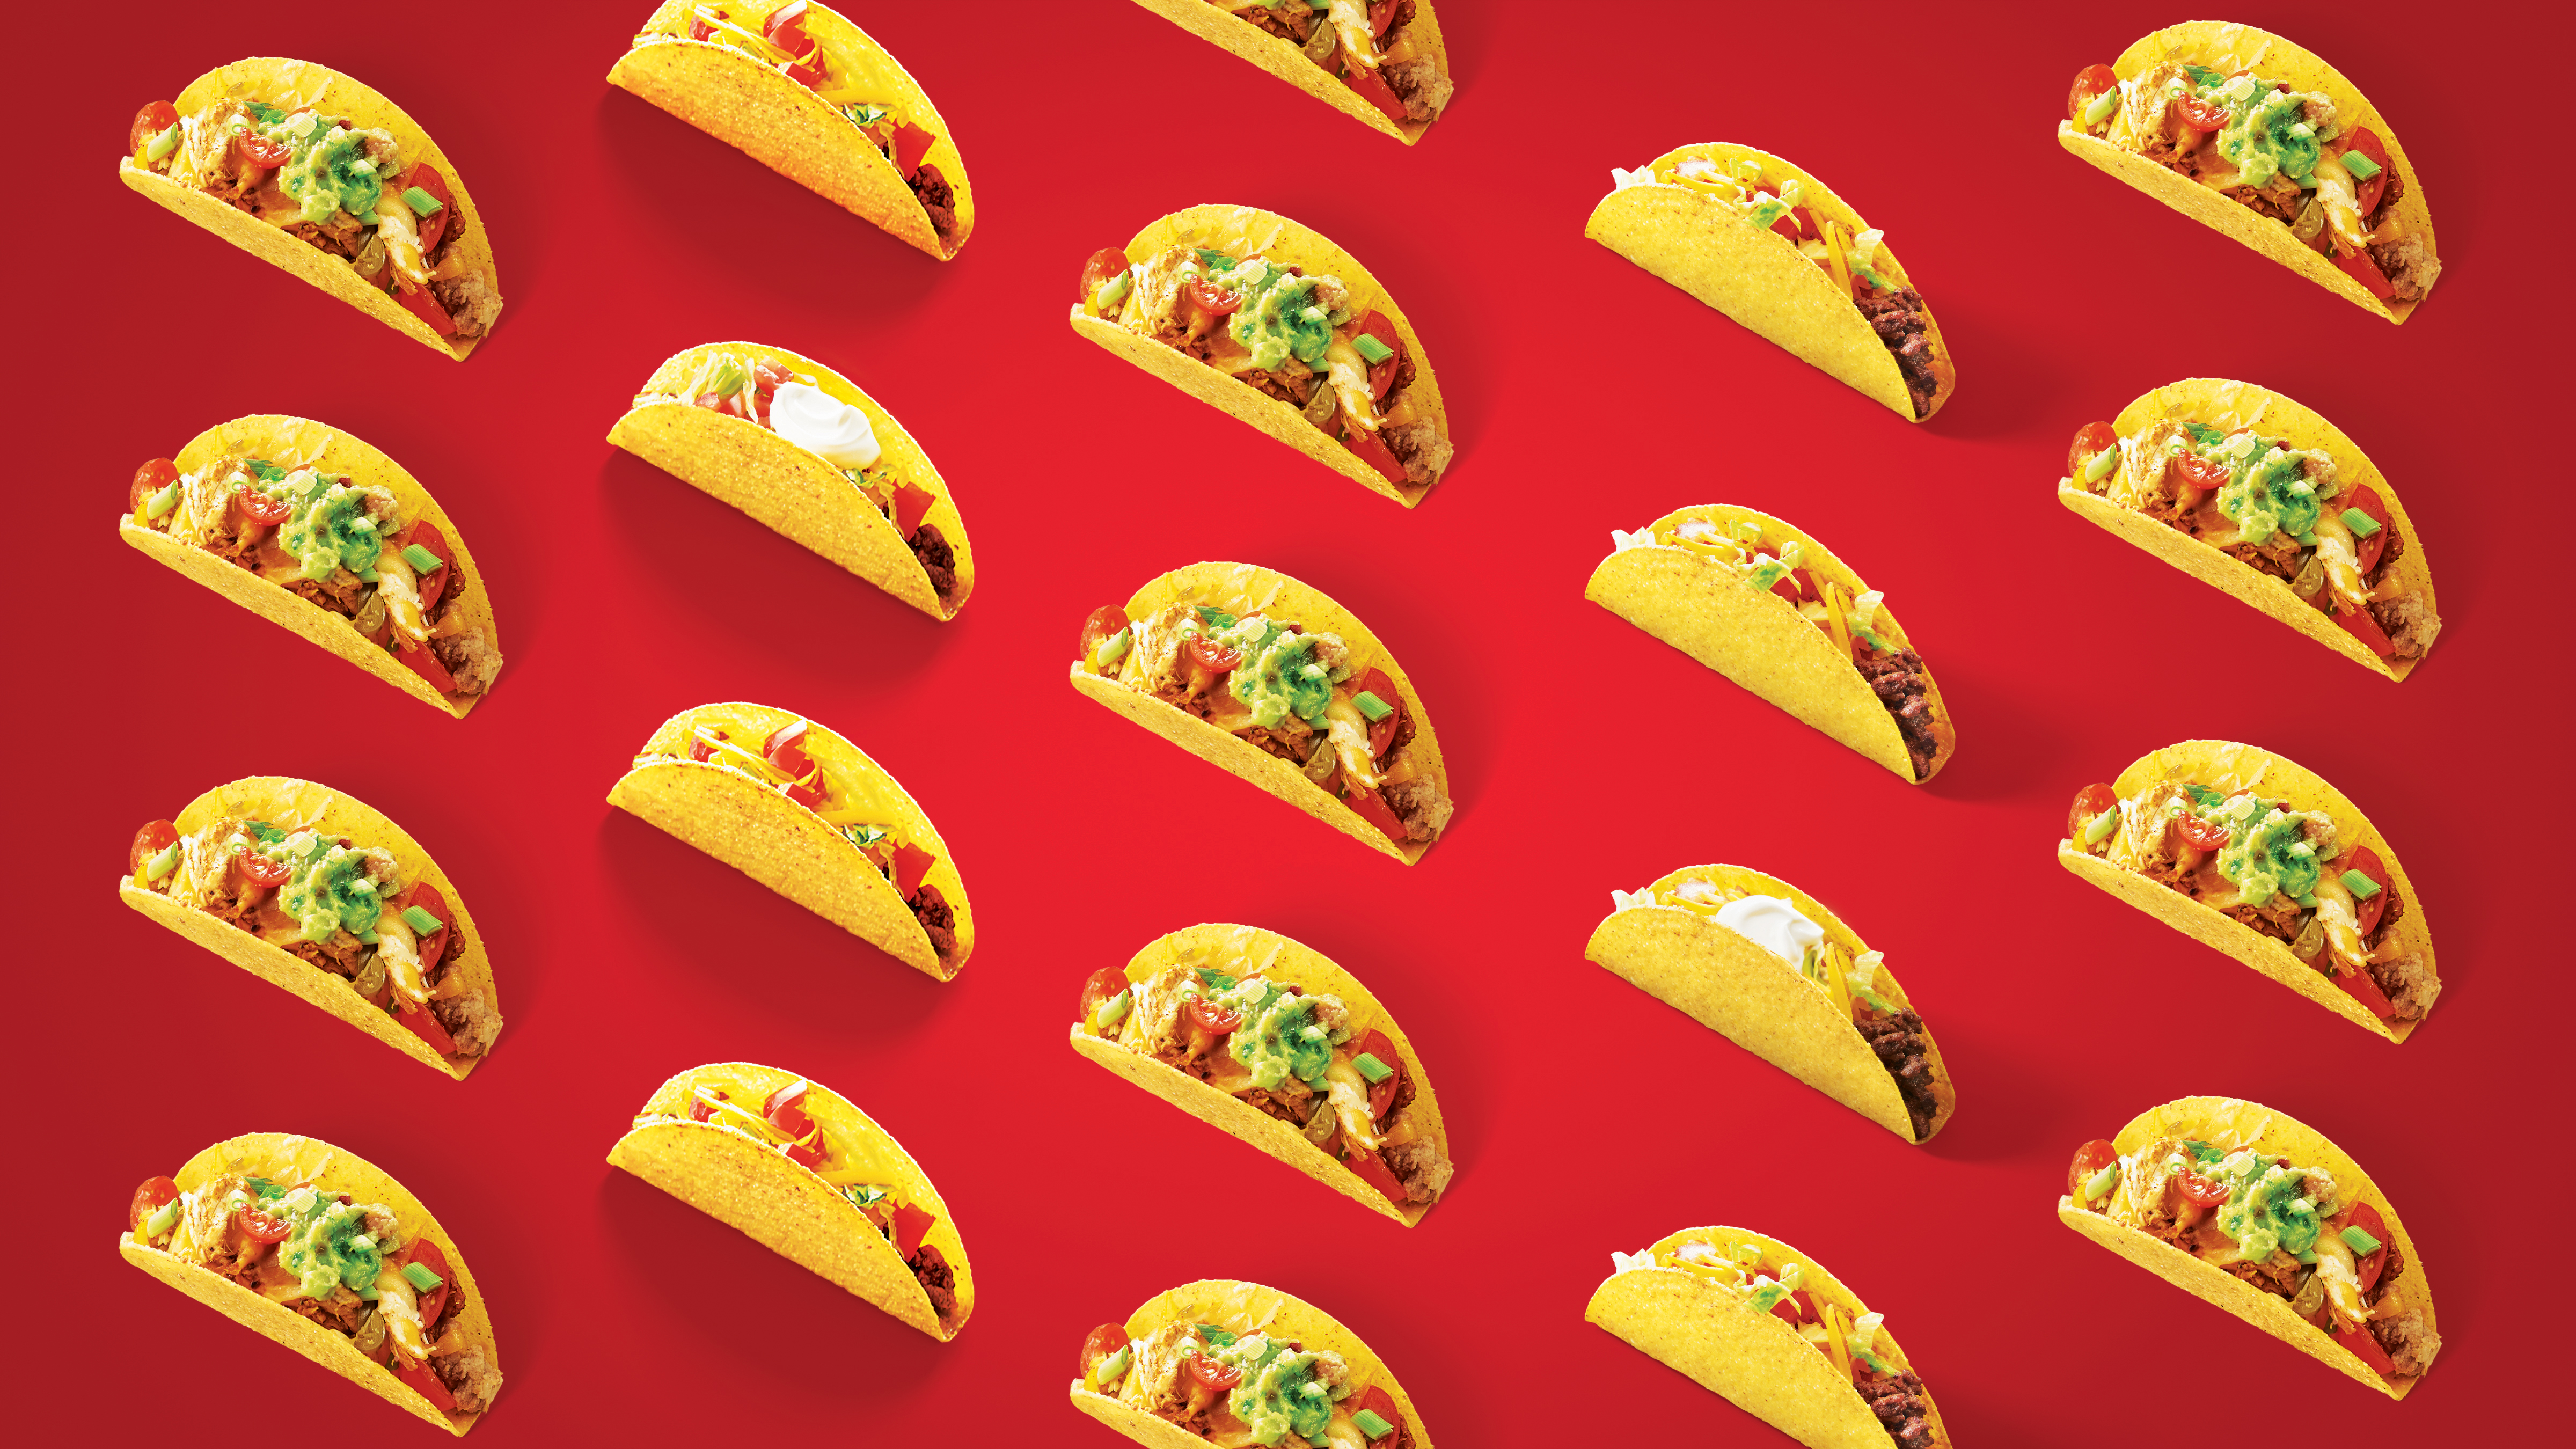 Old El Paso wraps on a red background